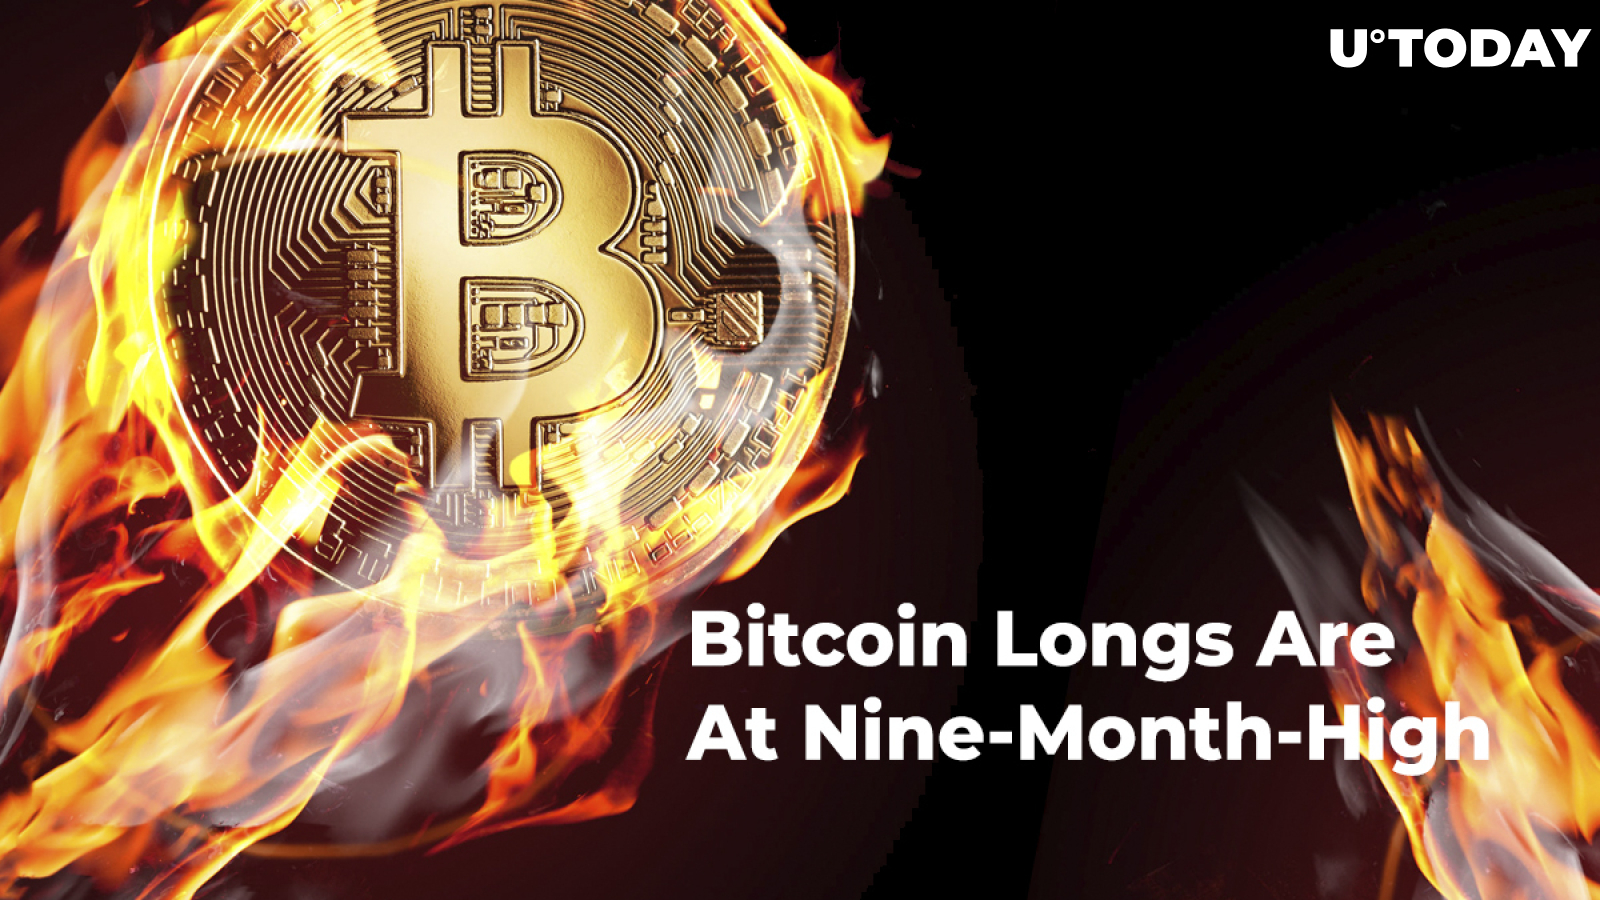 Crypto Analyst Says Bitcoin Longs at a Nine-Month High